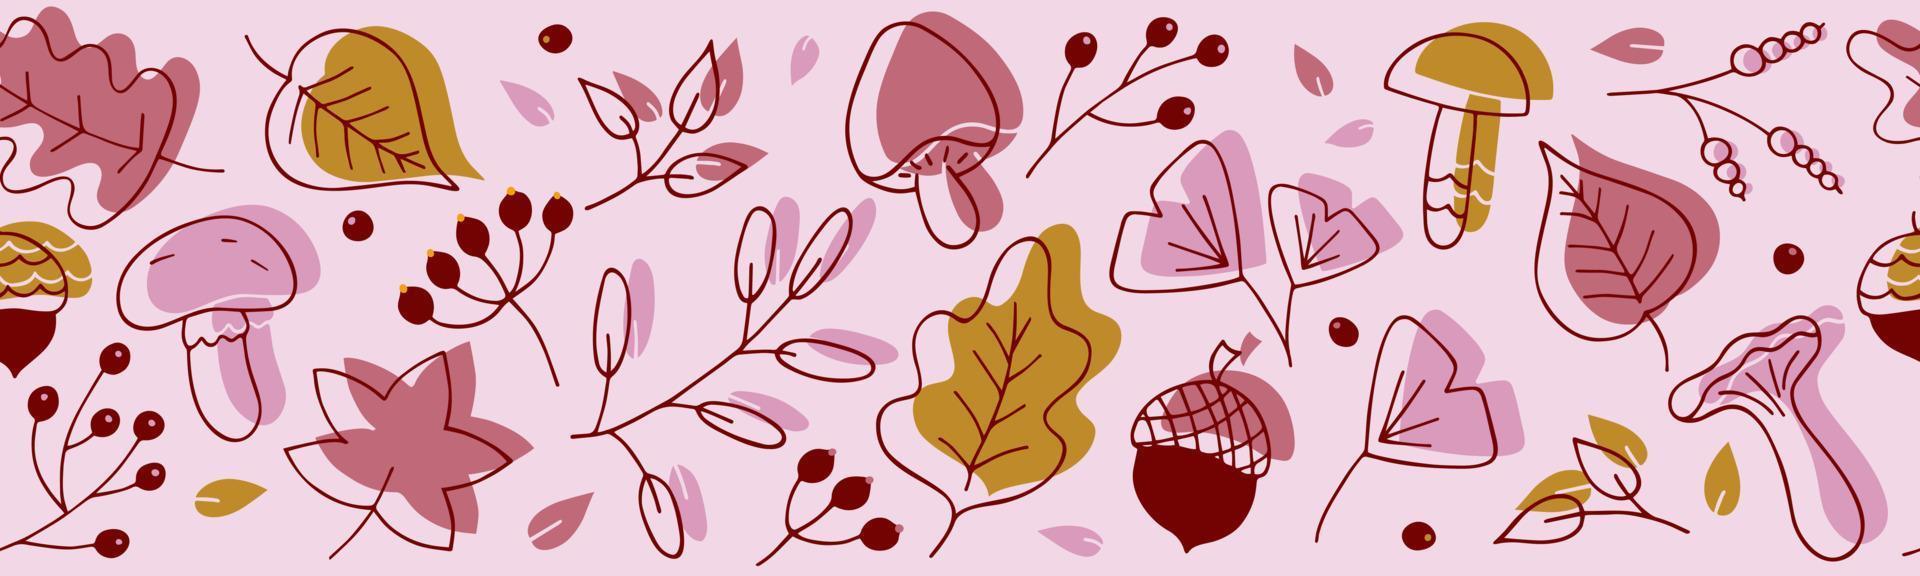 Vector seamless border of hand drawn leaves, mushrooms, twigs, berries and acorns. Repeating endless ornament with doodle decorative plants. Trendy background pattern of autumn botanical doodles